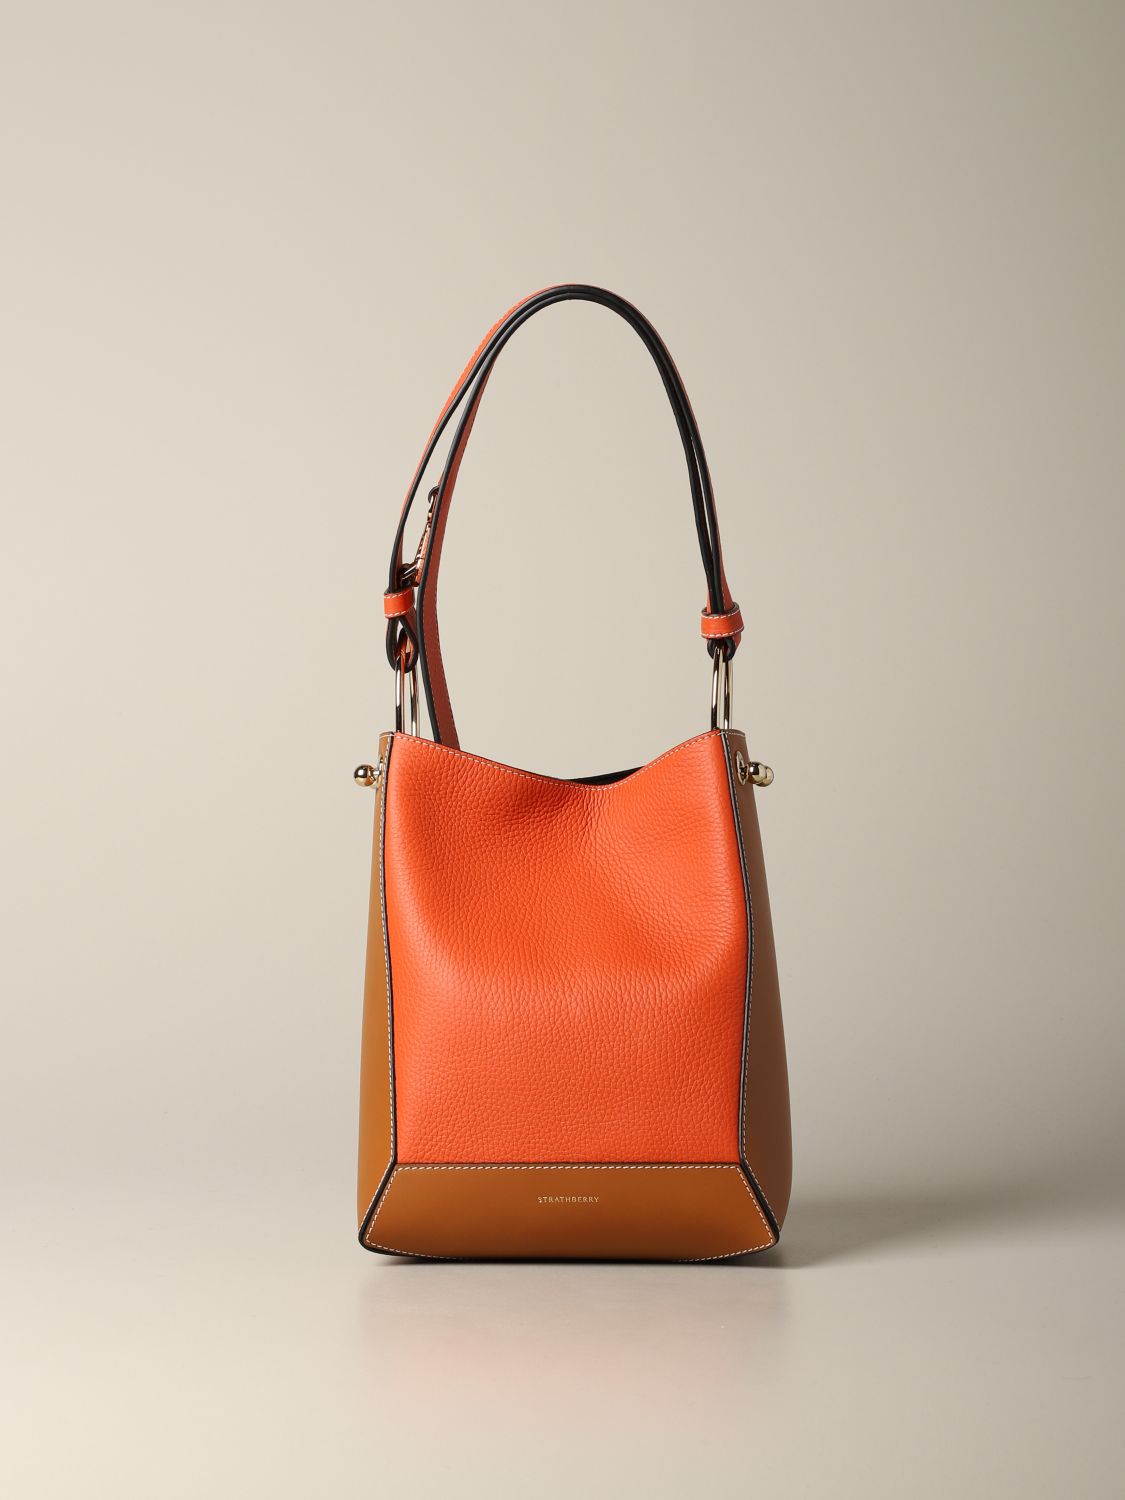 Strathberry Red Leather Midi Tote Strathberry